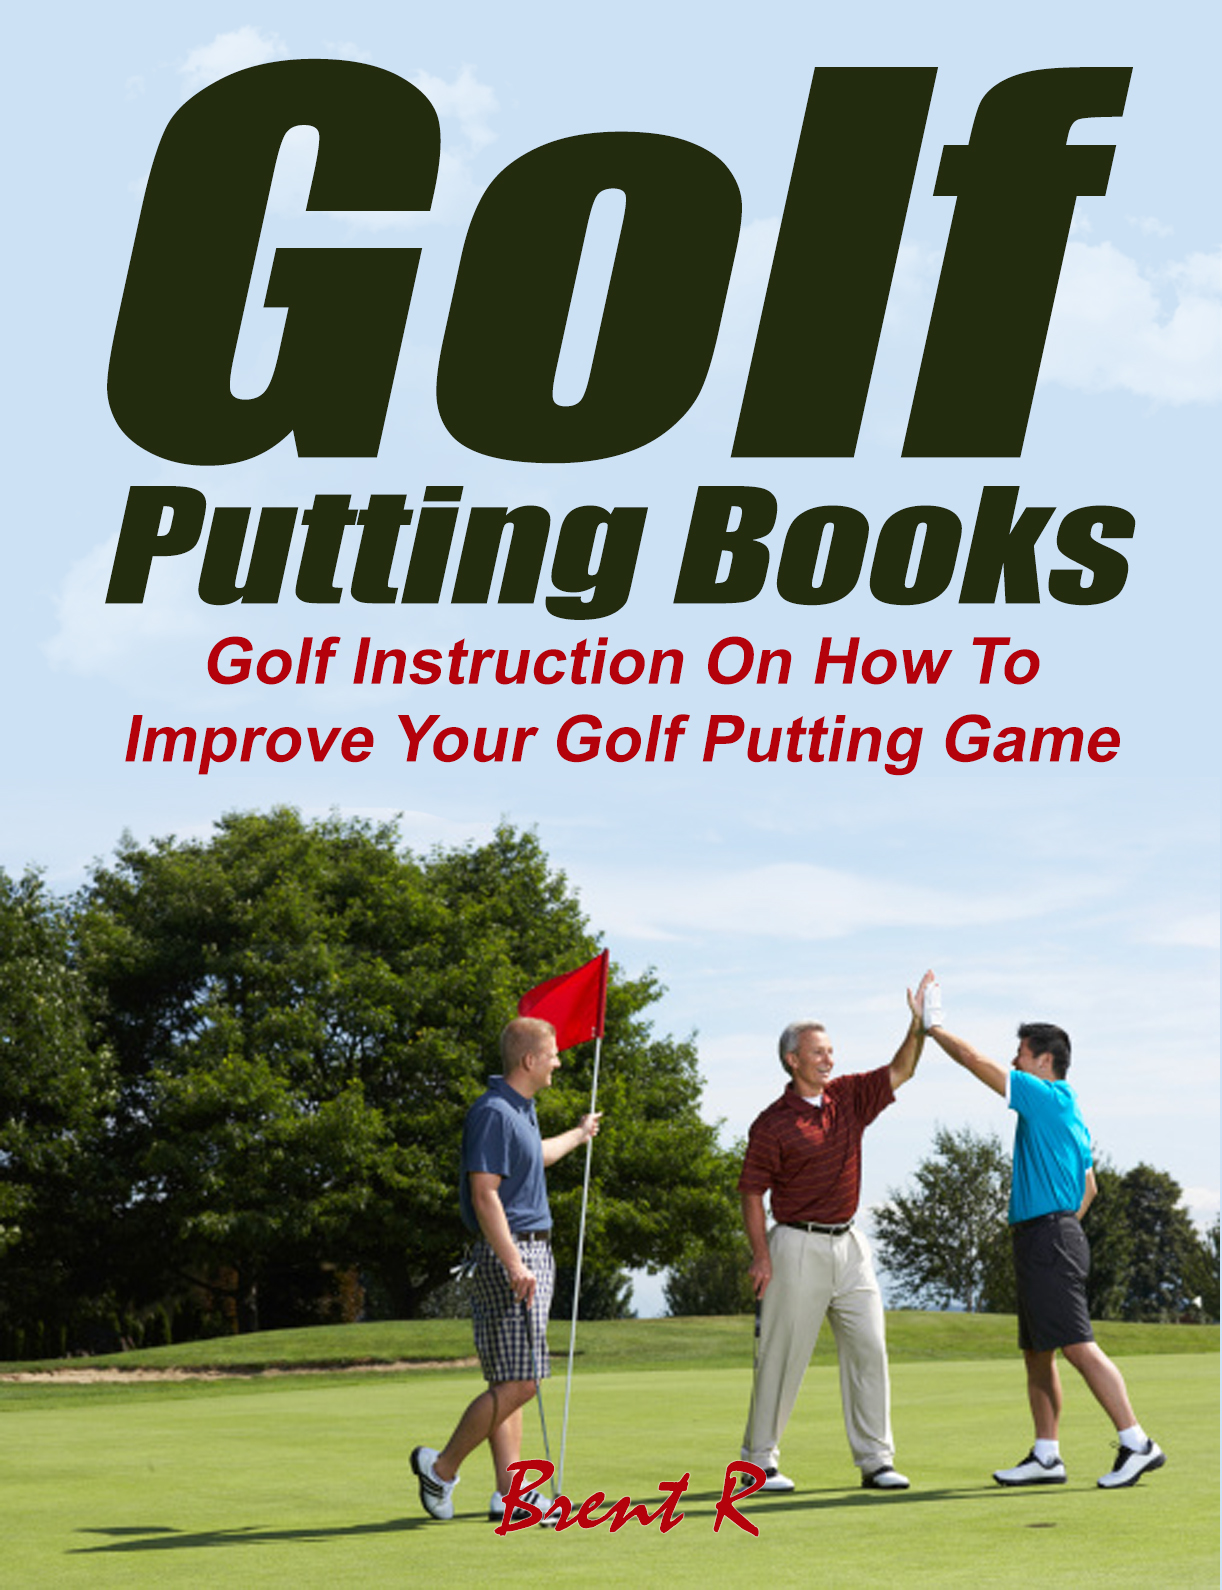 FREE: Golf Putting Books: Golf Instruction On How To Improve Your Golf Putting Game by Brent R